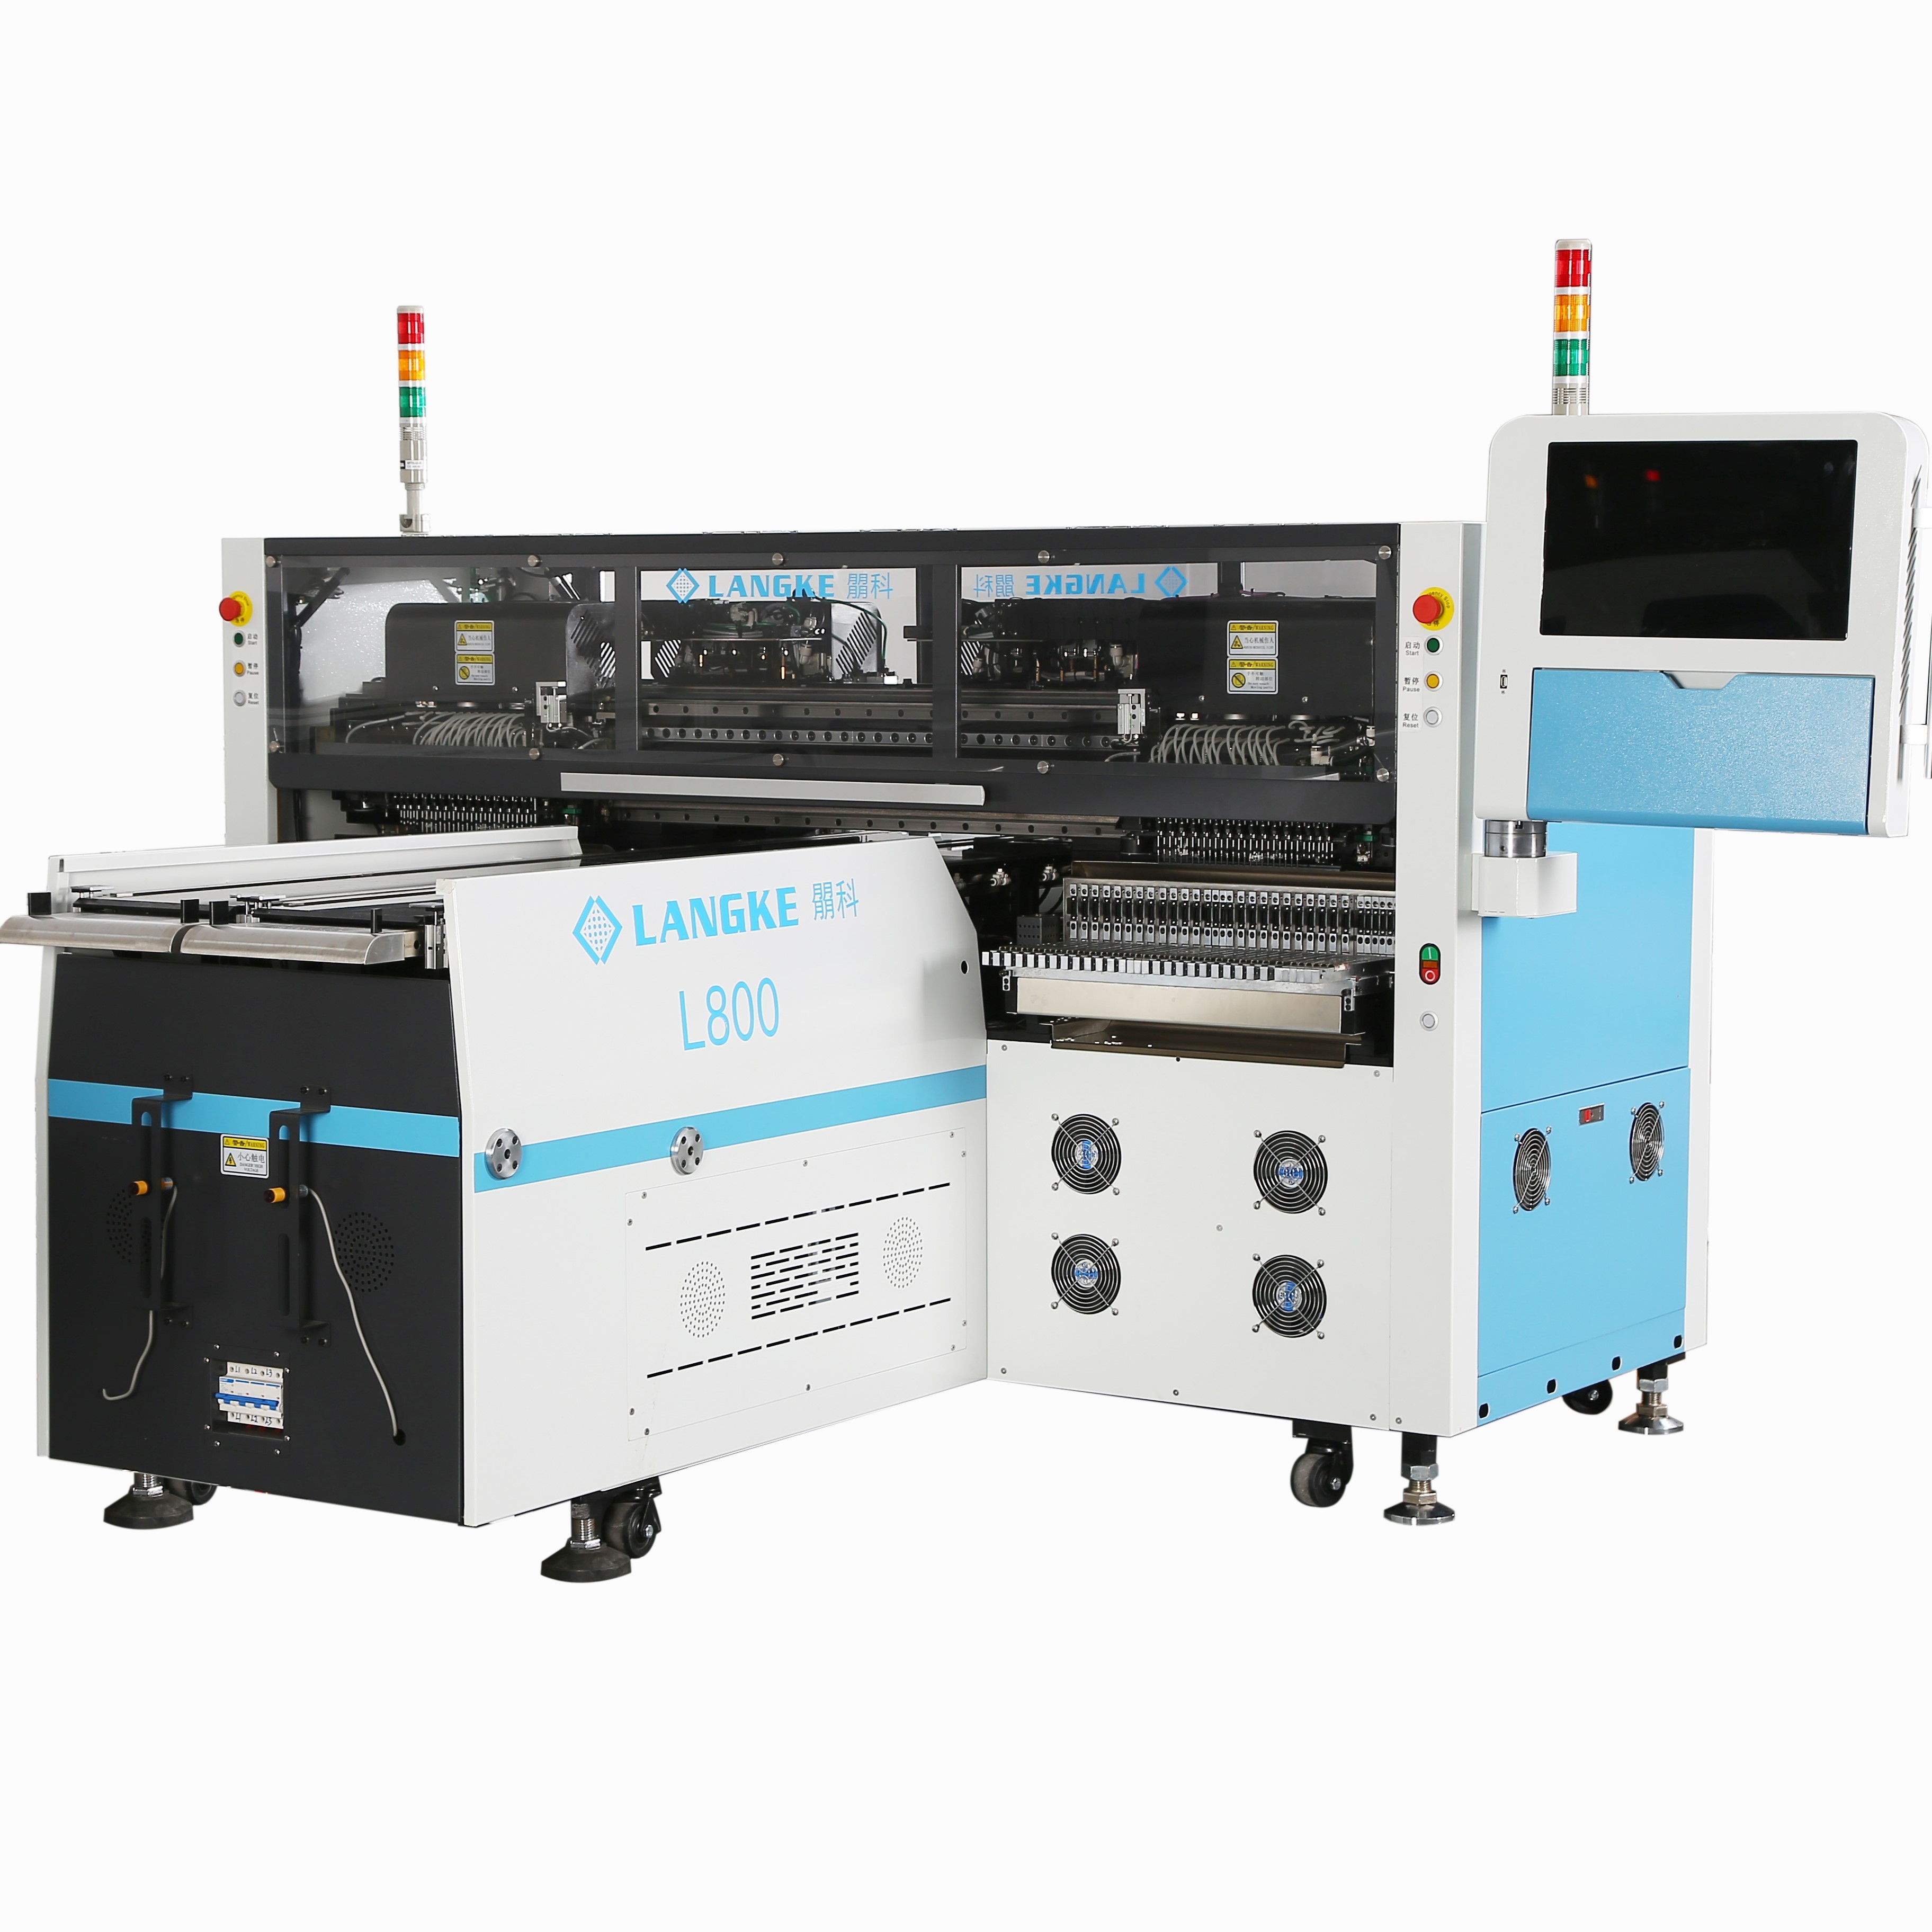 L800 large automatic simple mounter